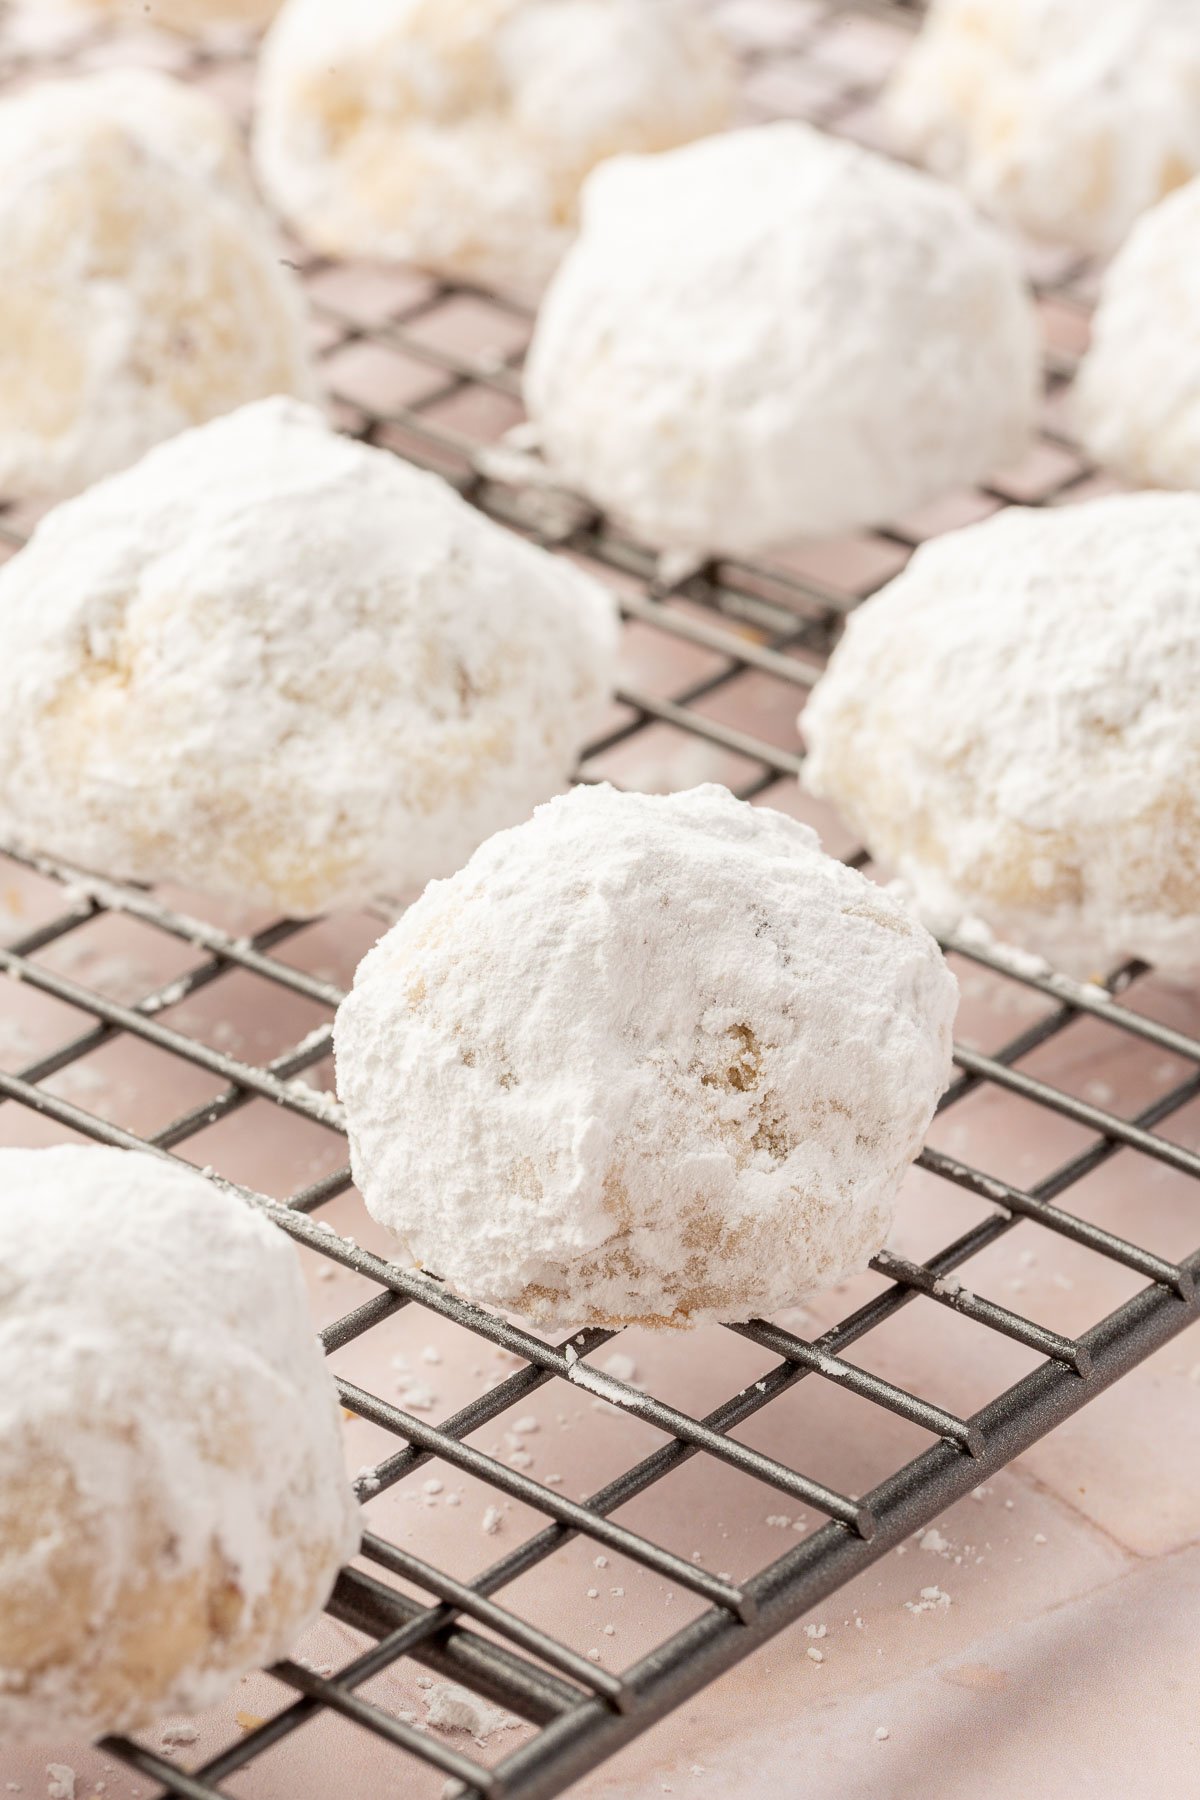 A wire cooling rack with snowball cookies on it that have been double coated in powdered sugar.